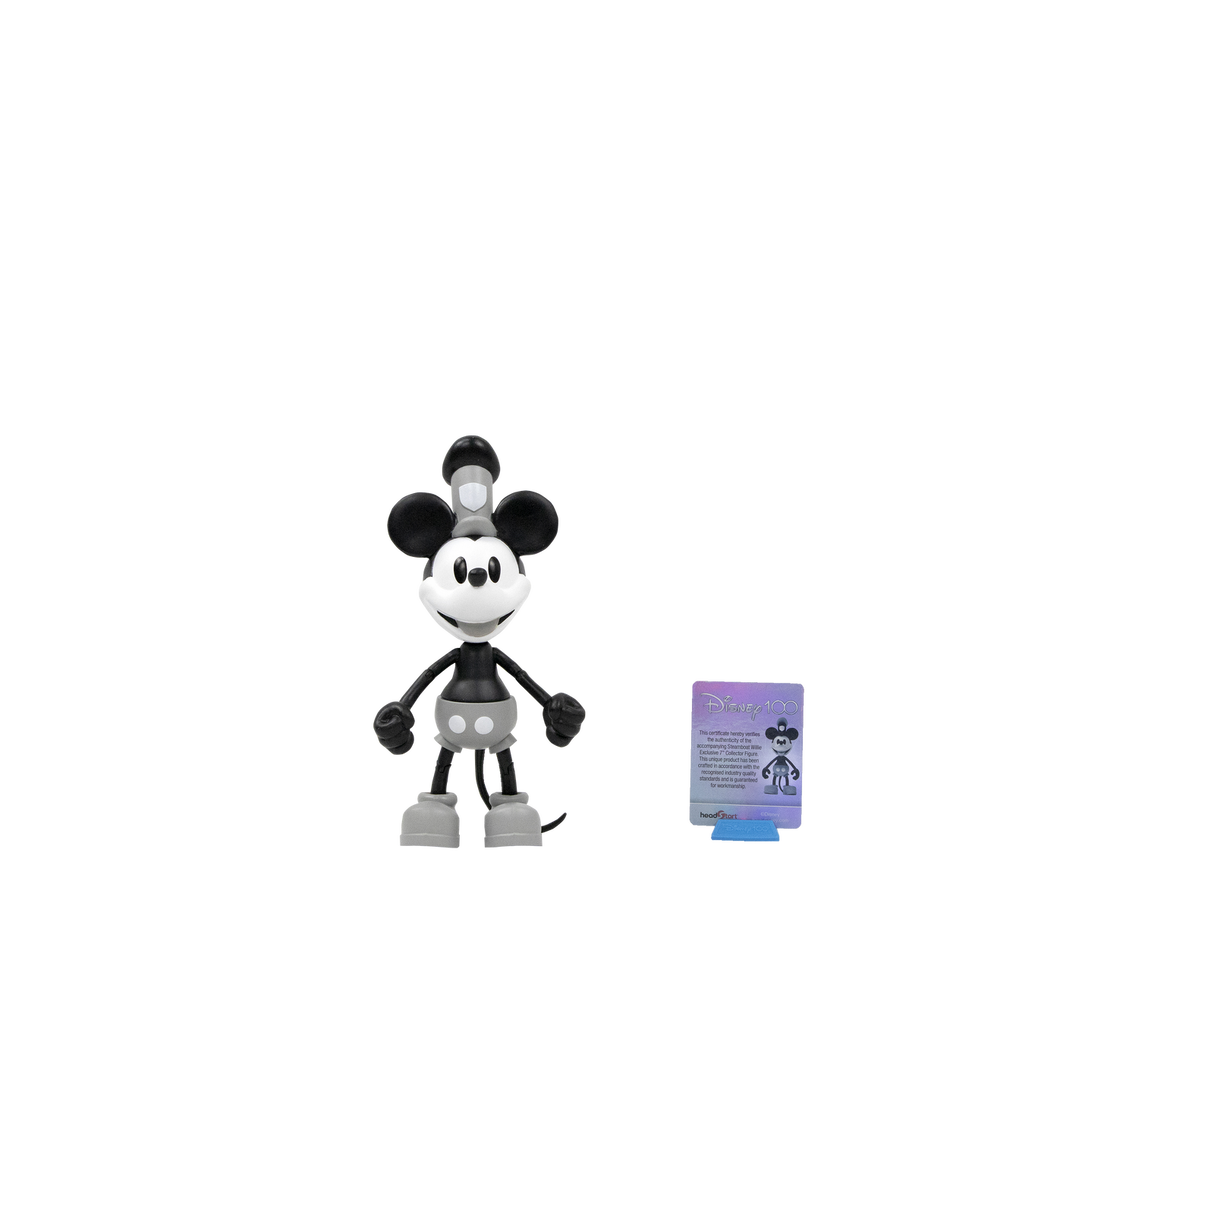 Disney 100 Collector Figure - Steamboat Willie (6-inch)